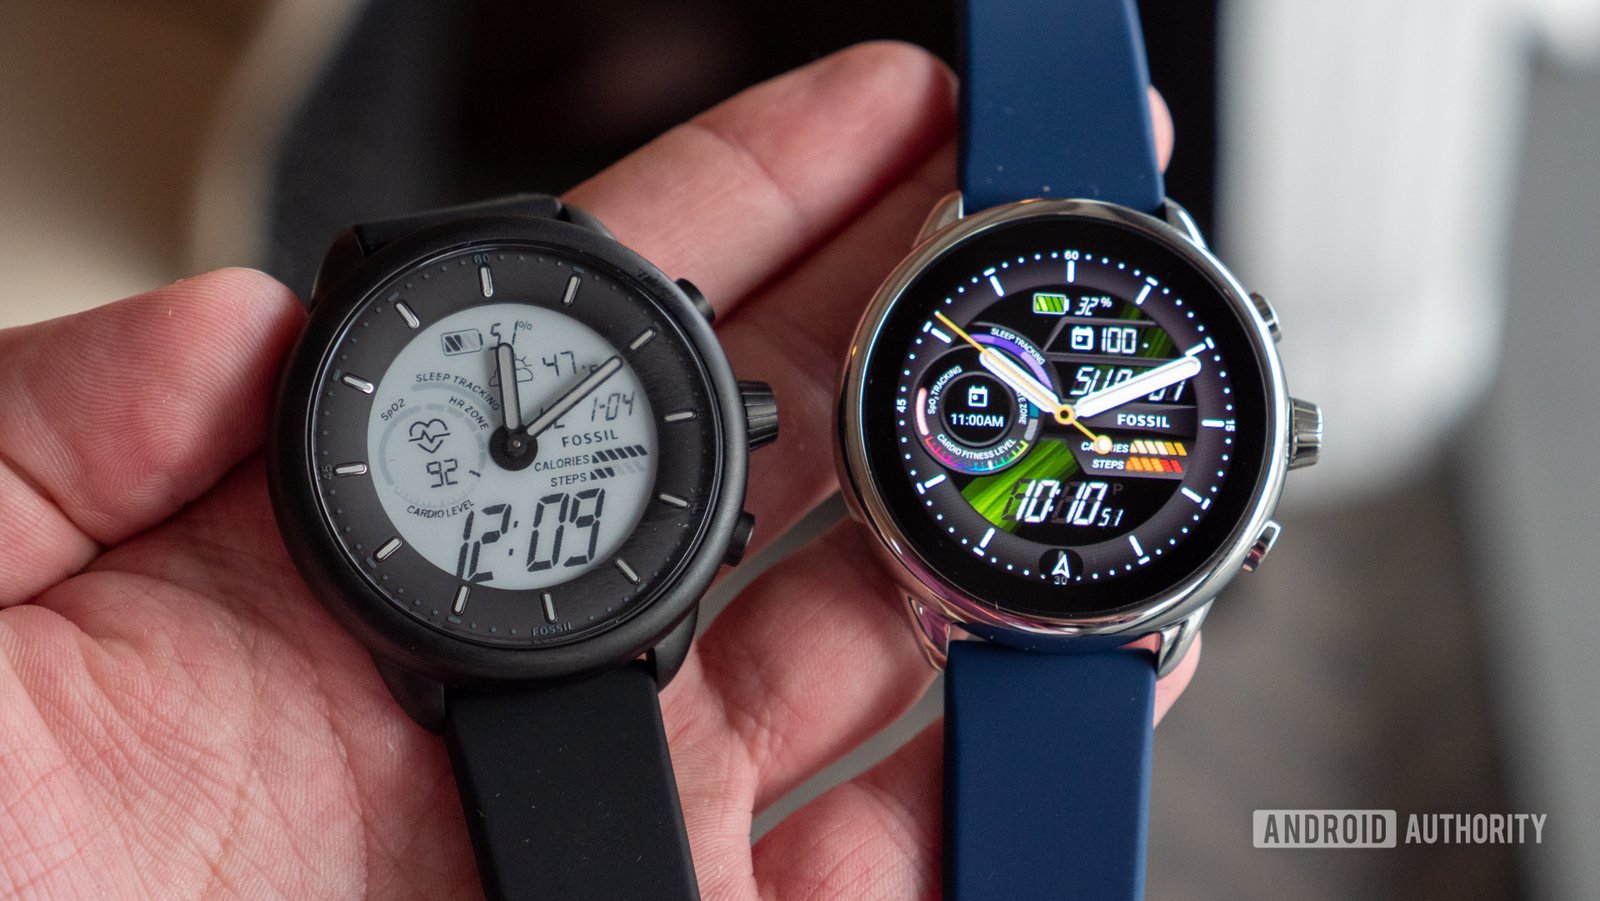 Fossil’s Wear OS watches hit rock bottom prices before going extinct